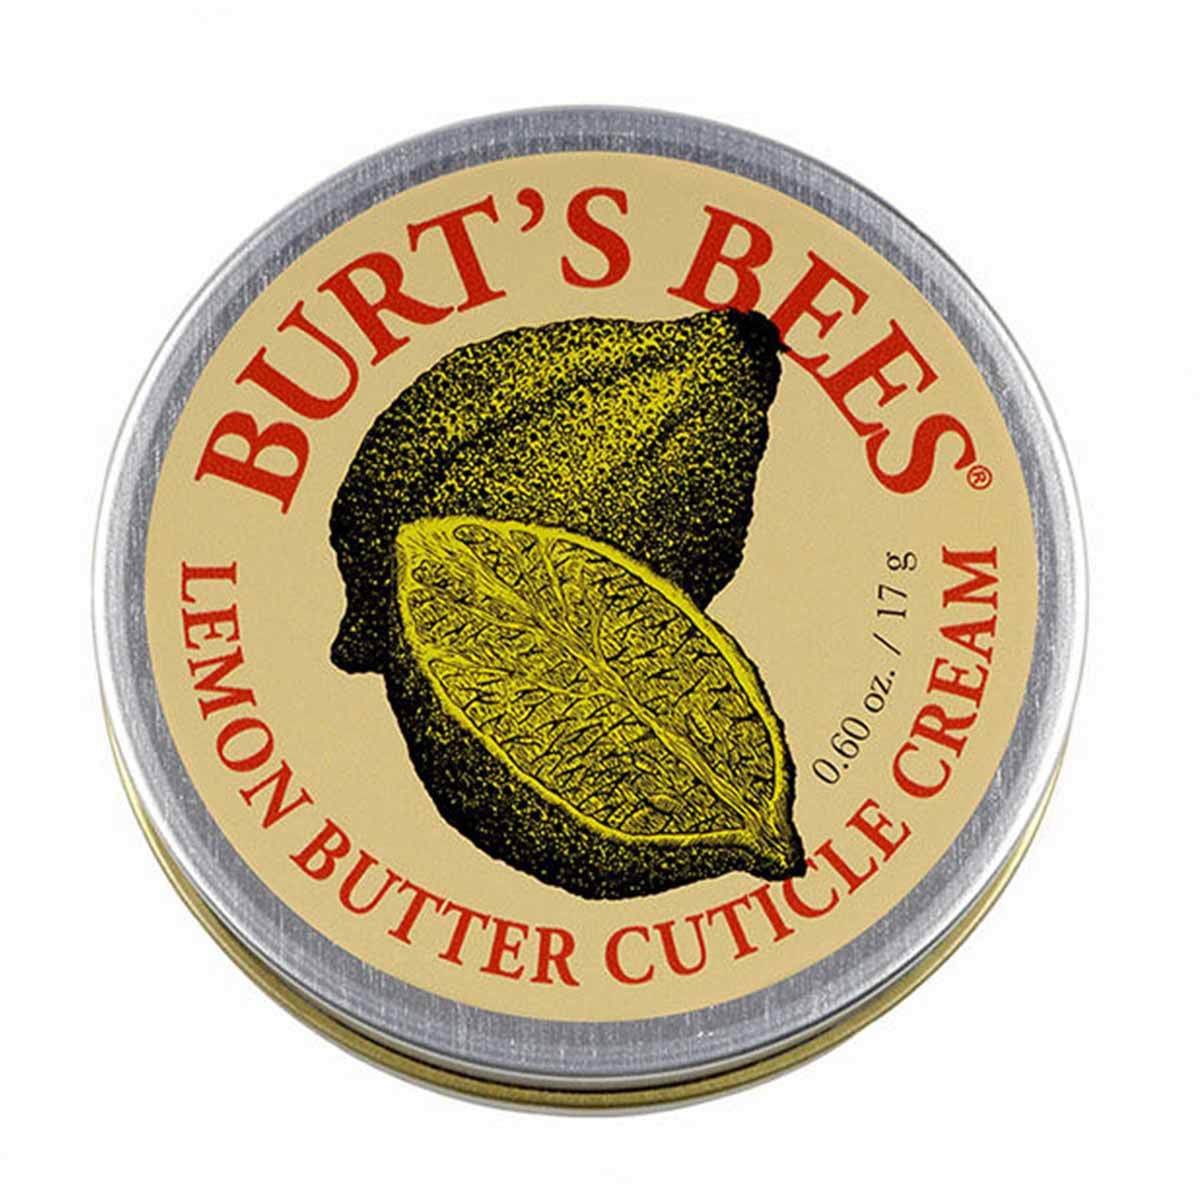 Primary image of Lemon Butter Cuticle Creme